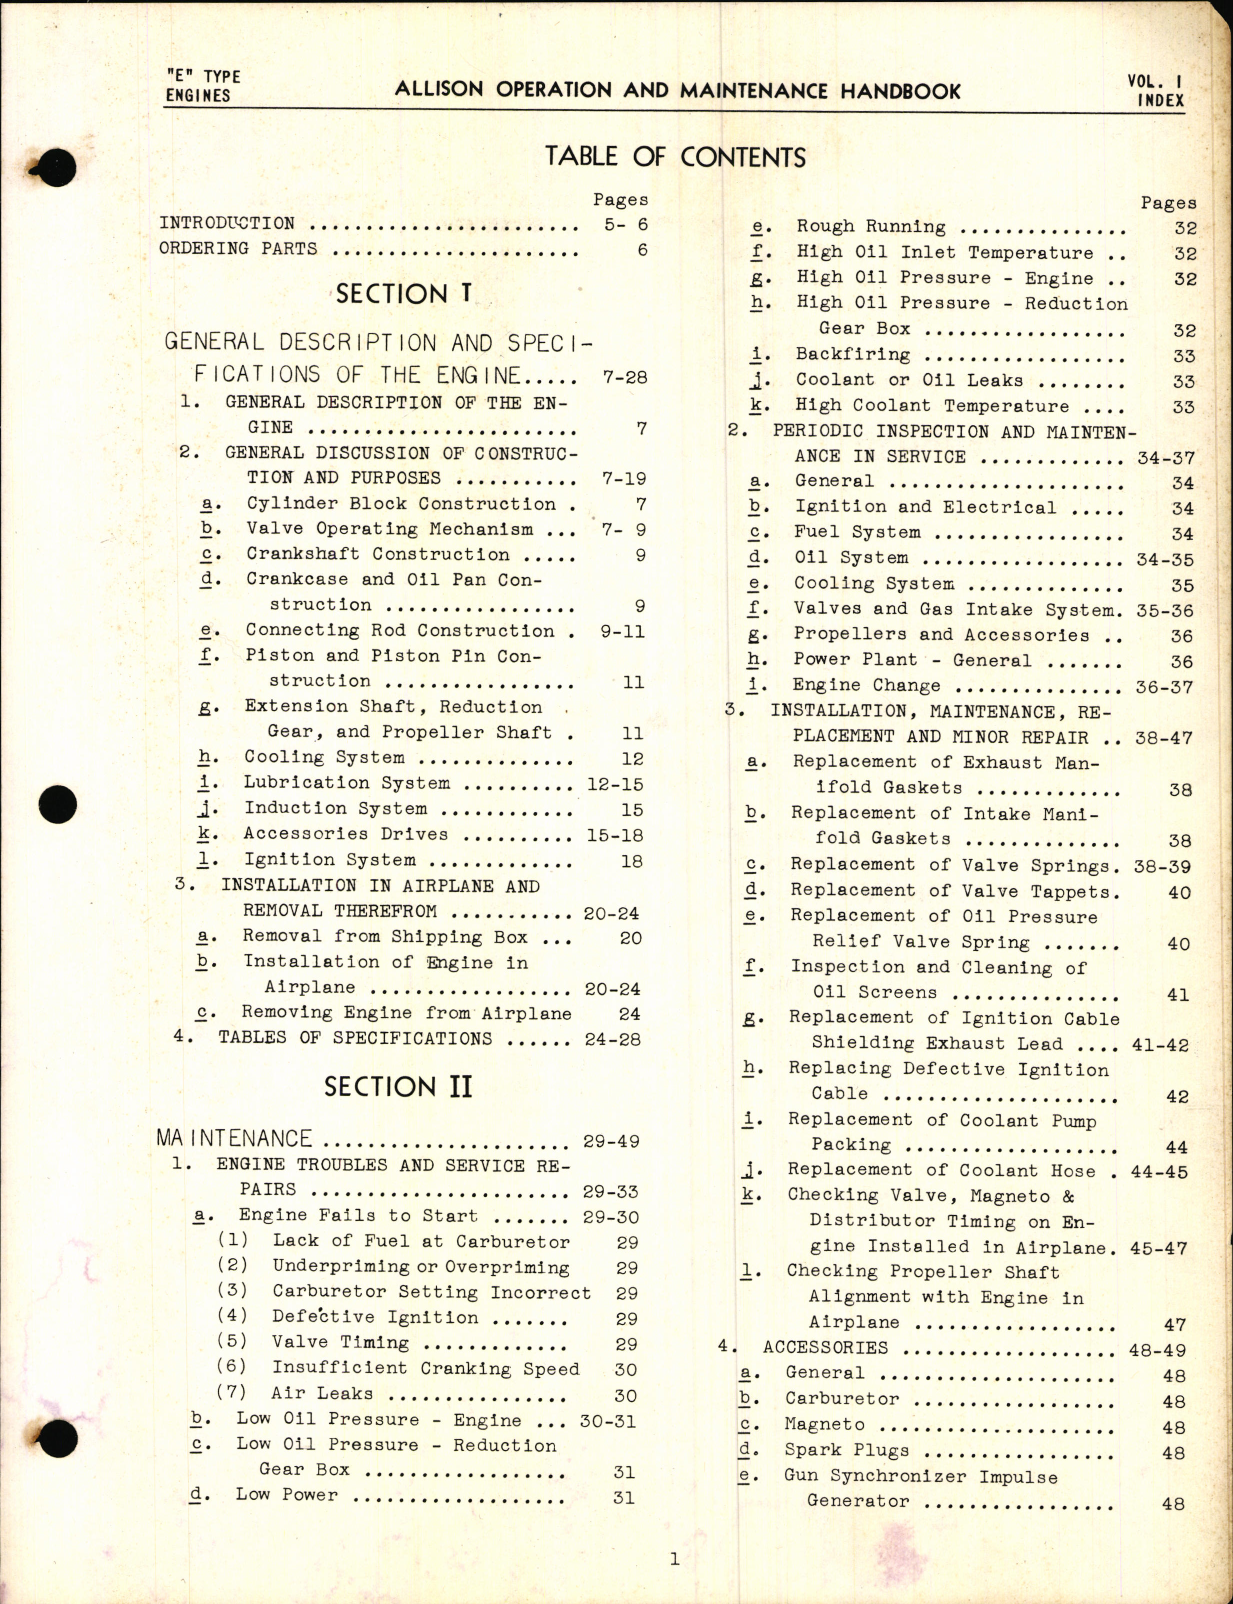 Sample page 3 from AirCorps Library document: Operation Maintenance for Allison V-1710 E Type Engines